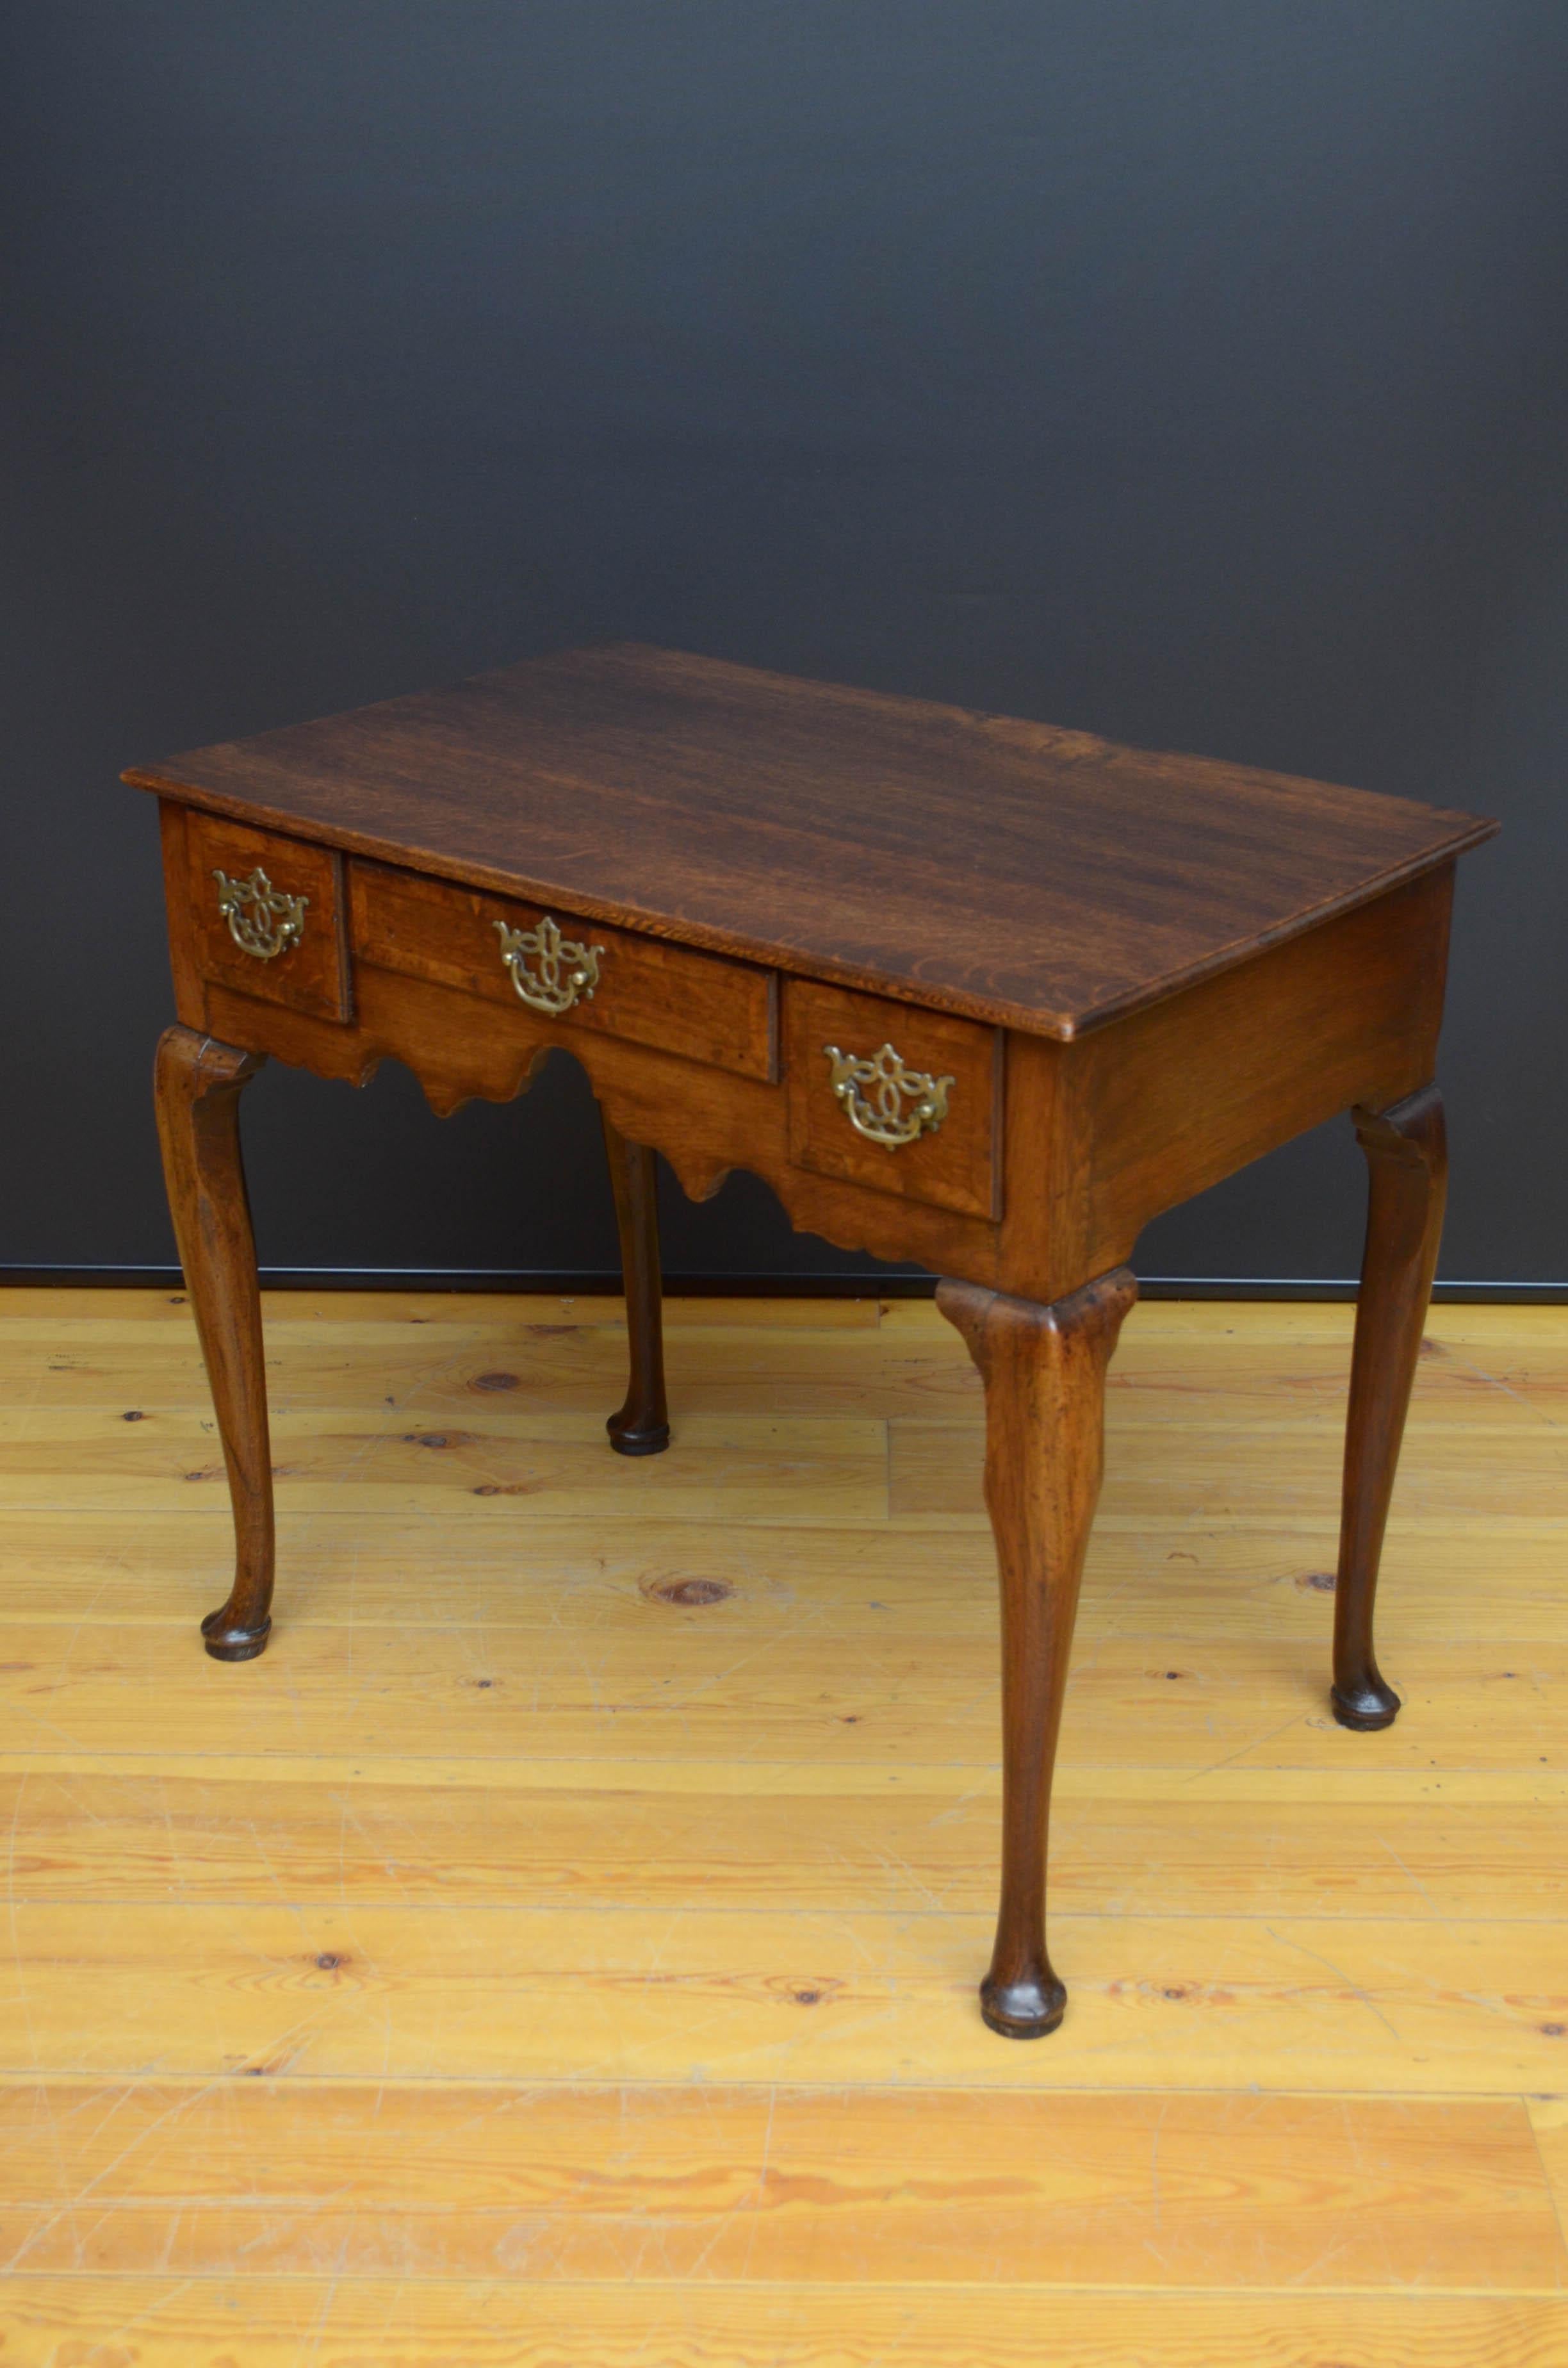 Sn5411 Georgian, oak side table, having oversailing top above three frieze oak lined drawers with crossbanded edge and fitted with original handles, all standing on cabriole legs terminating in pad feet. This antique table retains its original